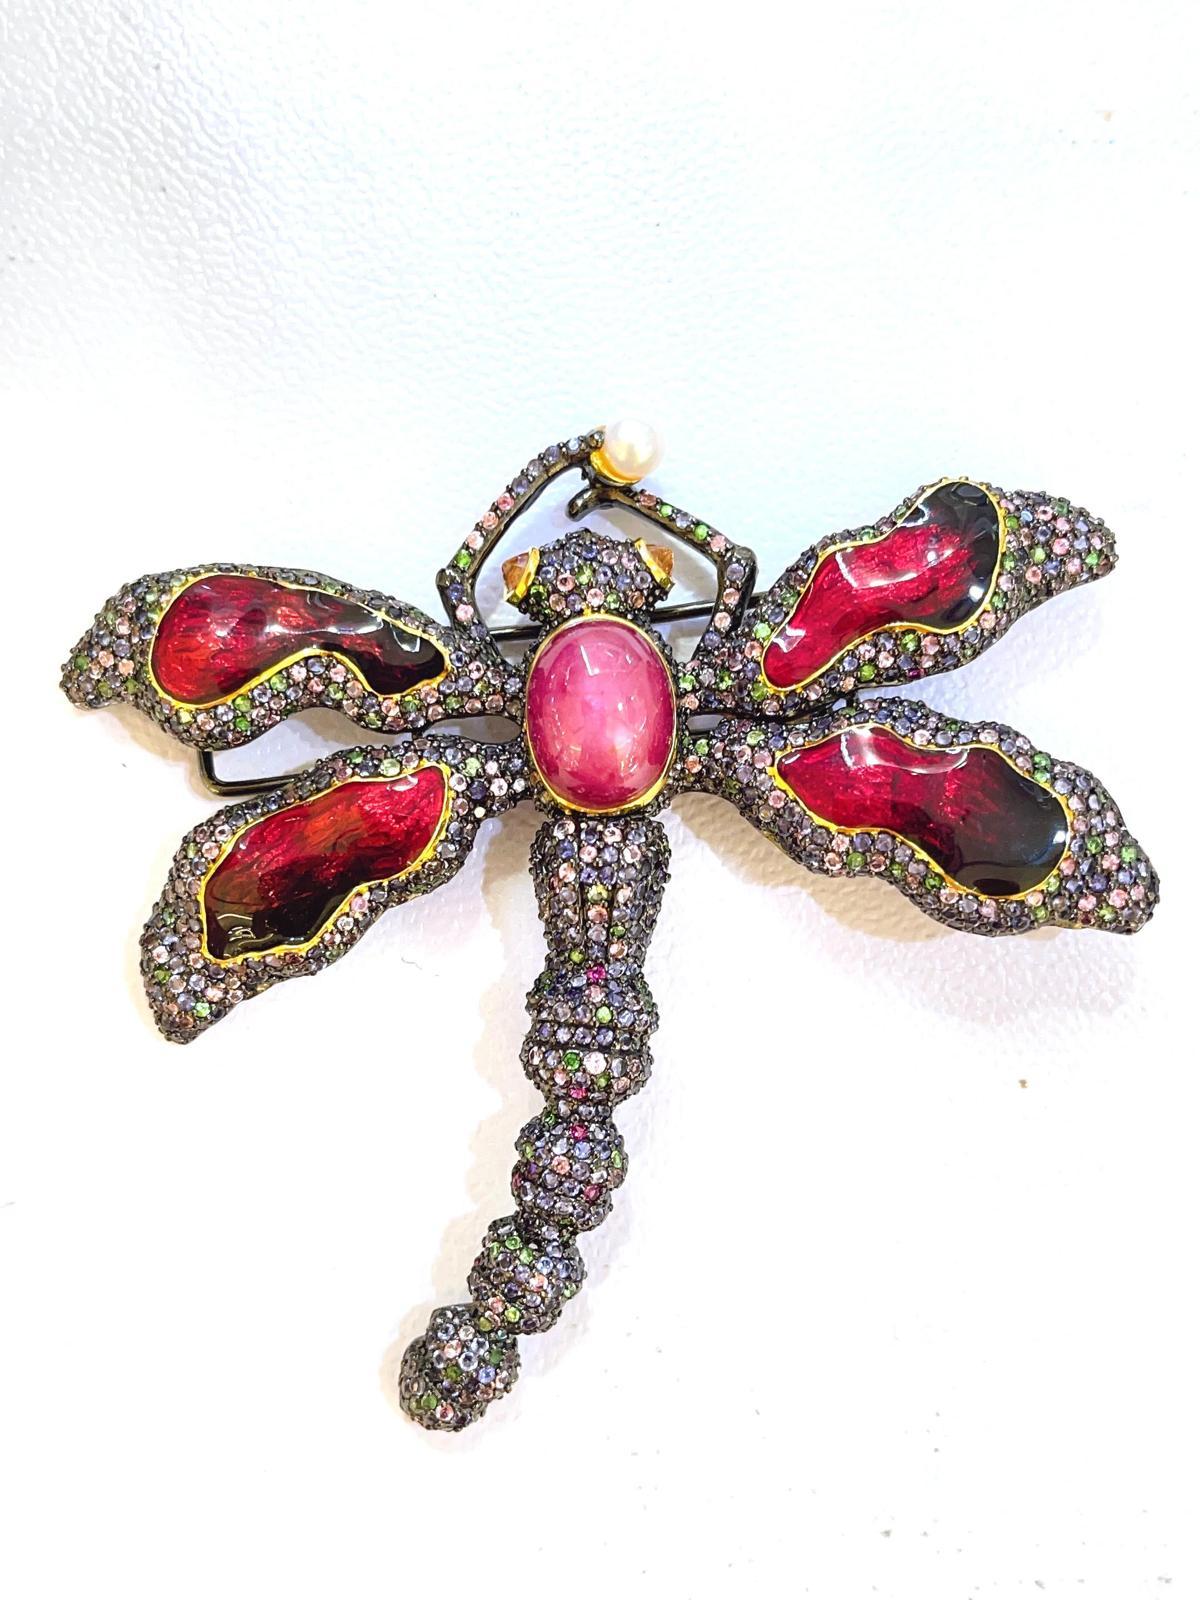 Bochic “Orient” Sapphire, Red Ruby & Red Enamel Brooch Set In 18K Gold & Silver 
Fancy Multi color Sapphire from Sri Lanka - 7 Carats 
Red Ruby Cabochons - 10 Carats 
Red Enamel and Pearl
The Bochic 